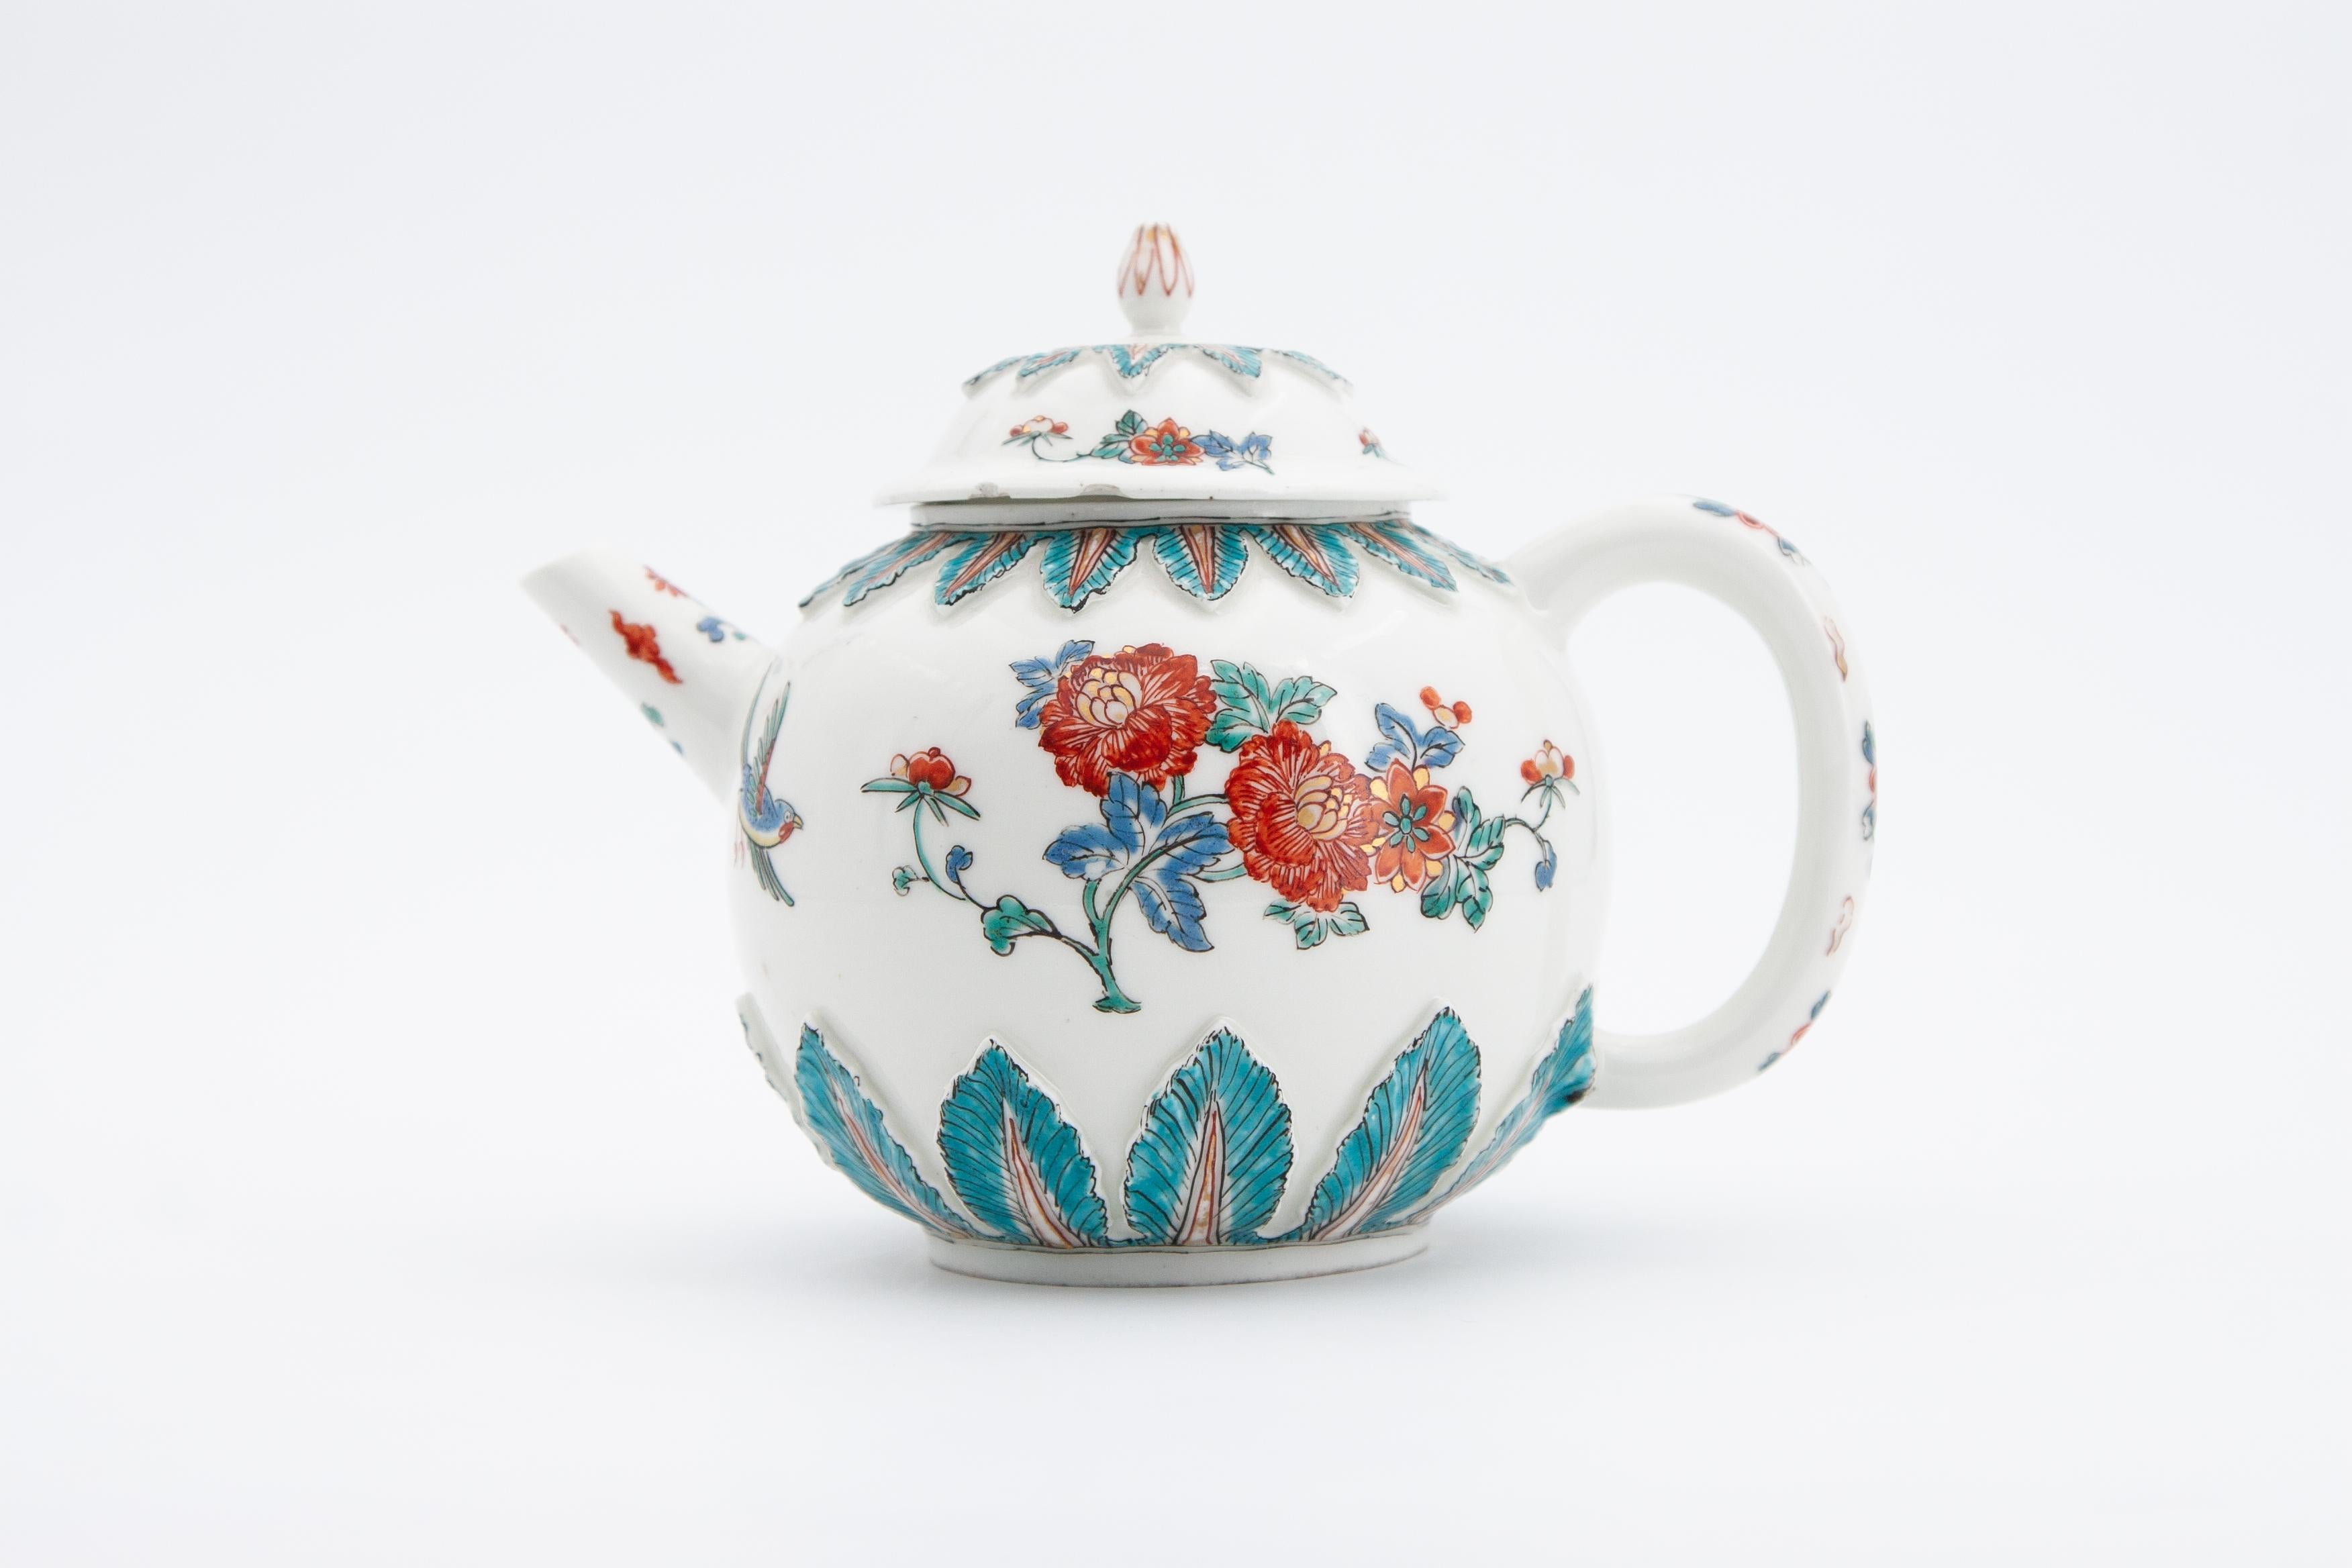 German Early Meissen Porcelain Teapot circa 1715 from the Arnhold Collection For Sale